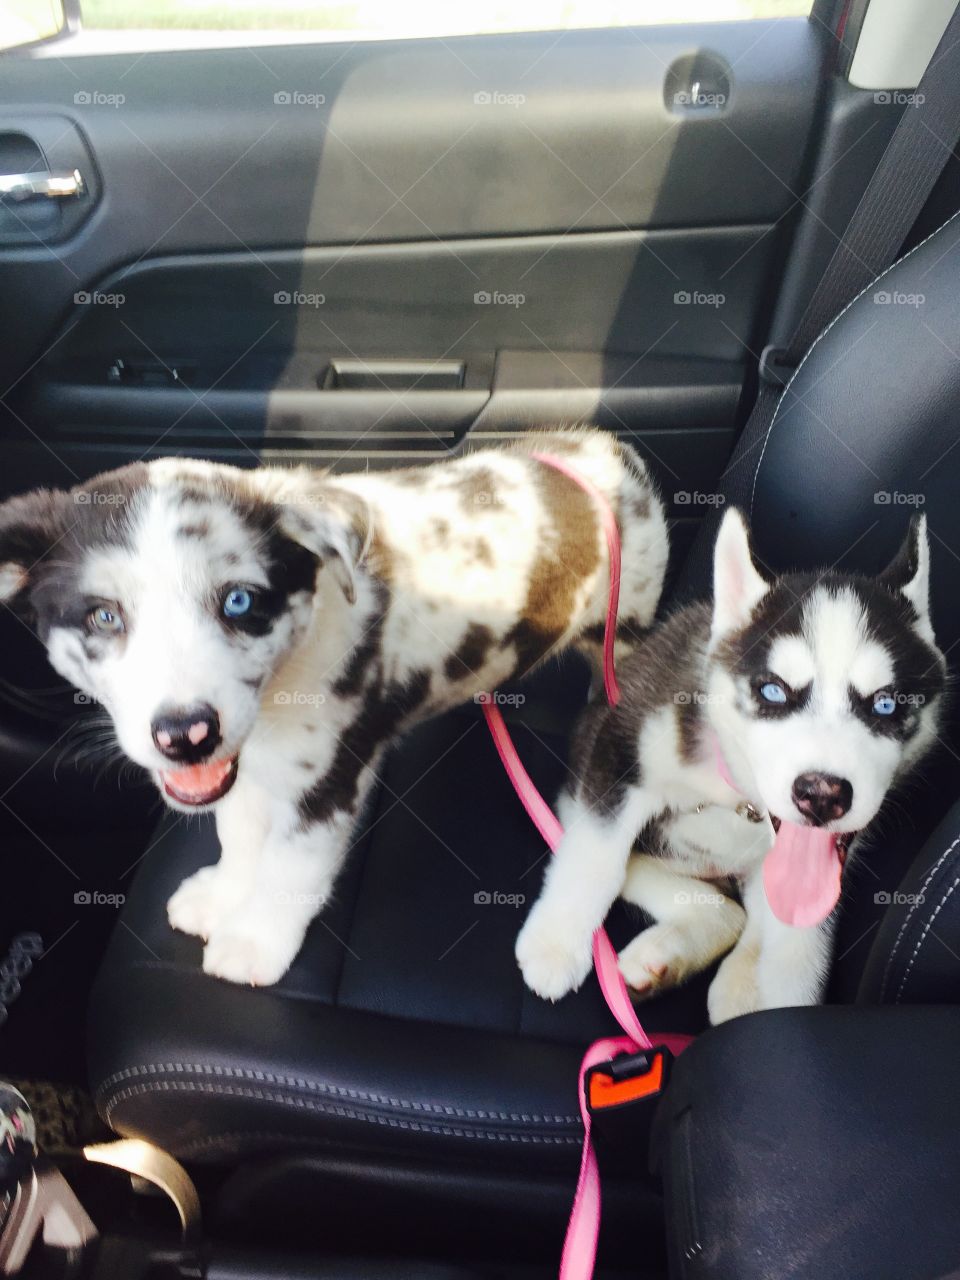 Car ride with the pups🐶. Australian Shepard border collie mix and husky